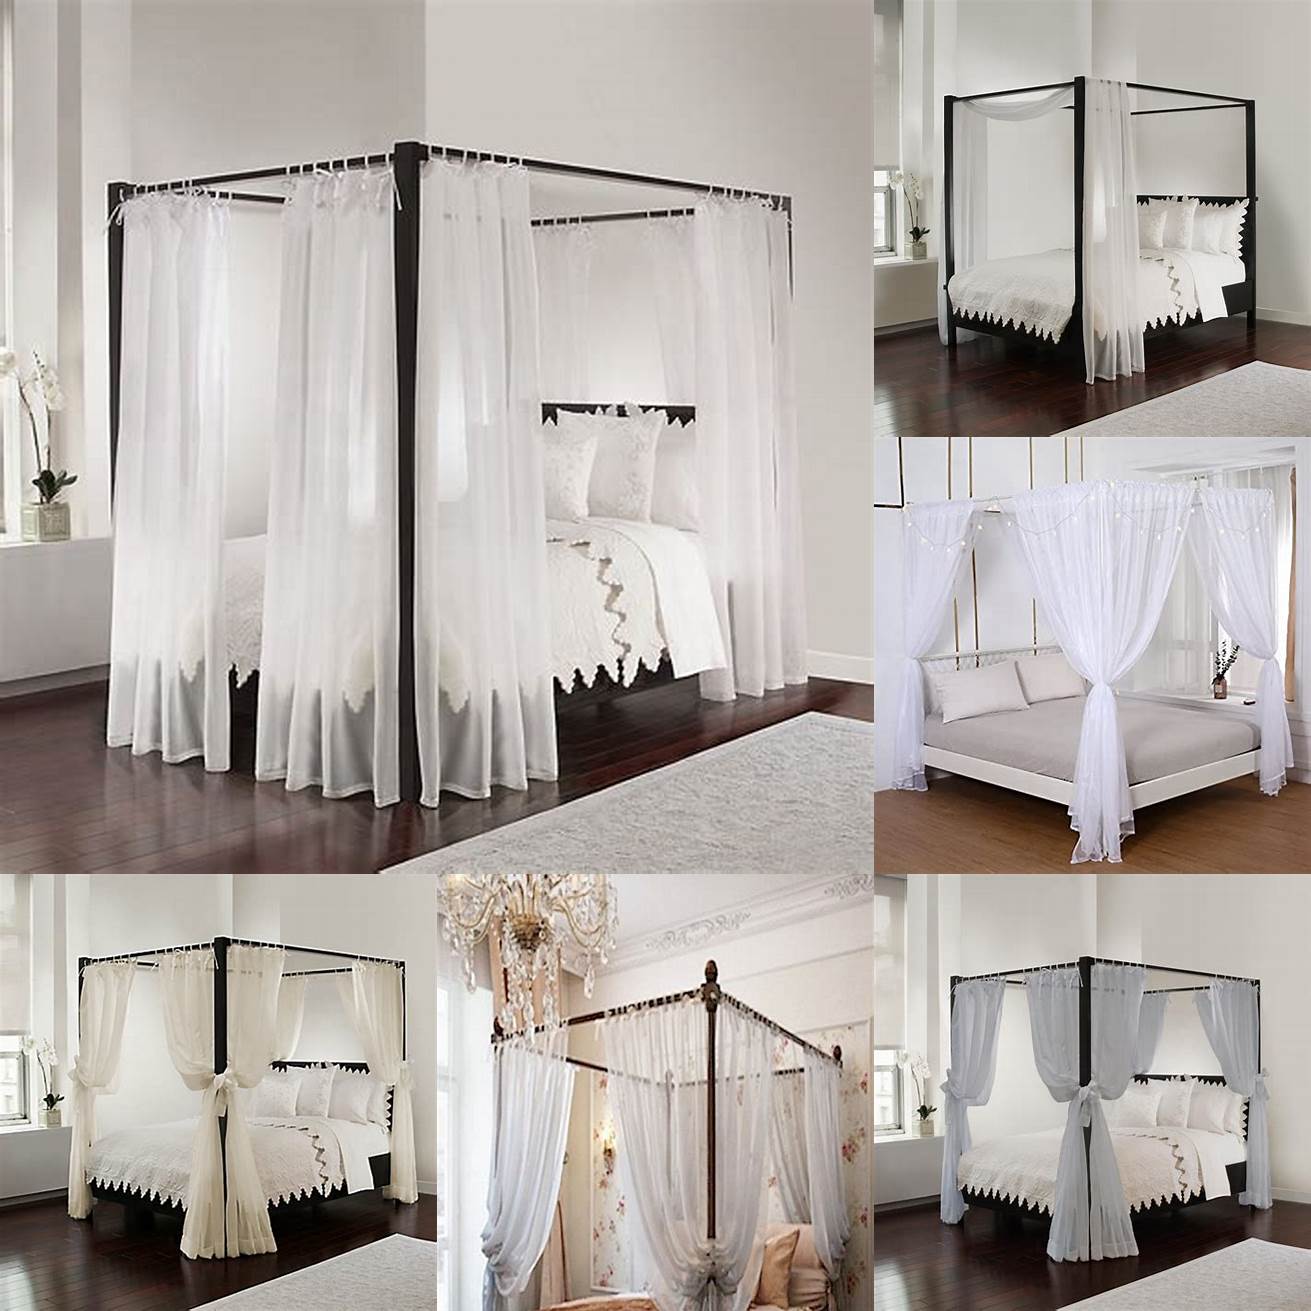 A low platform bed with a canopy and sheer curtains